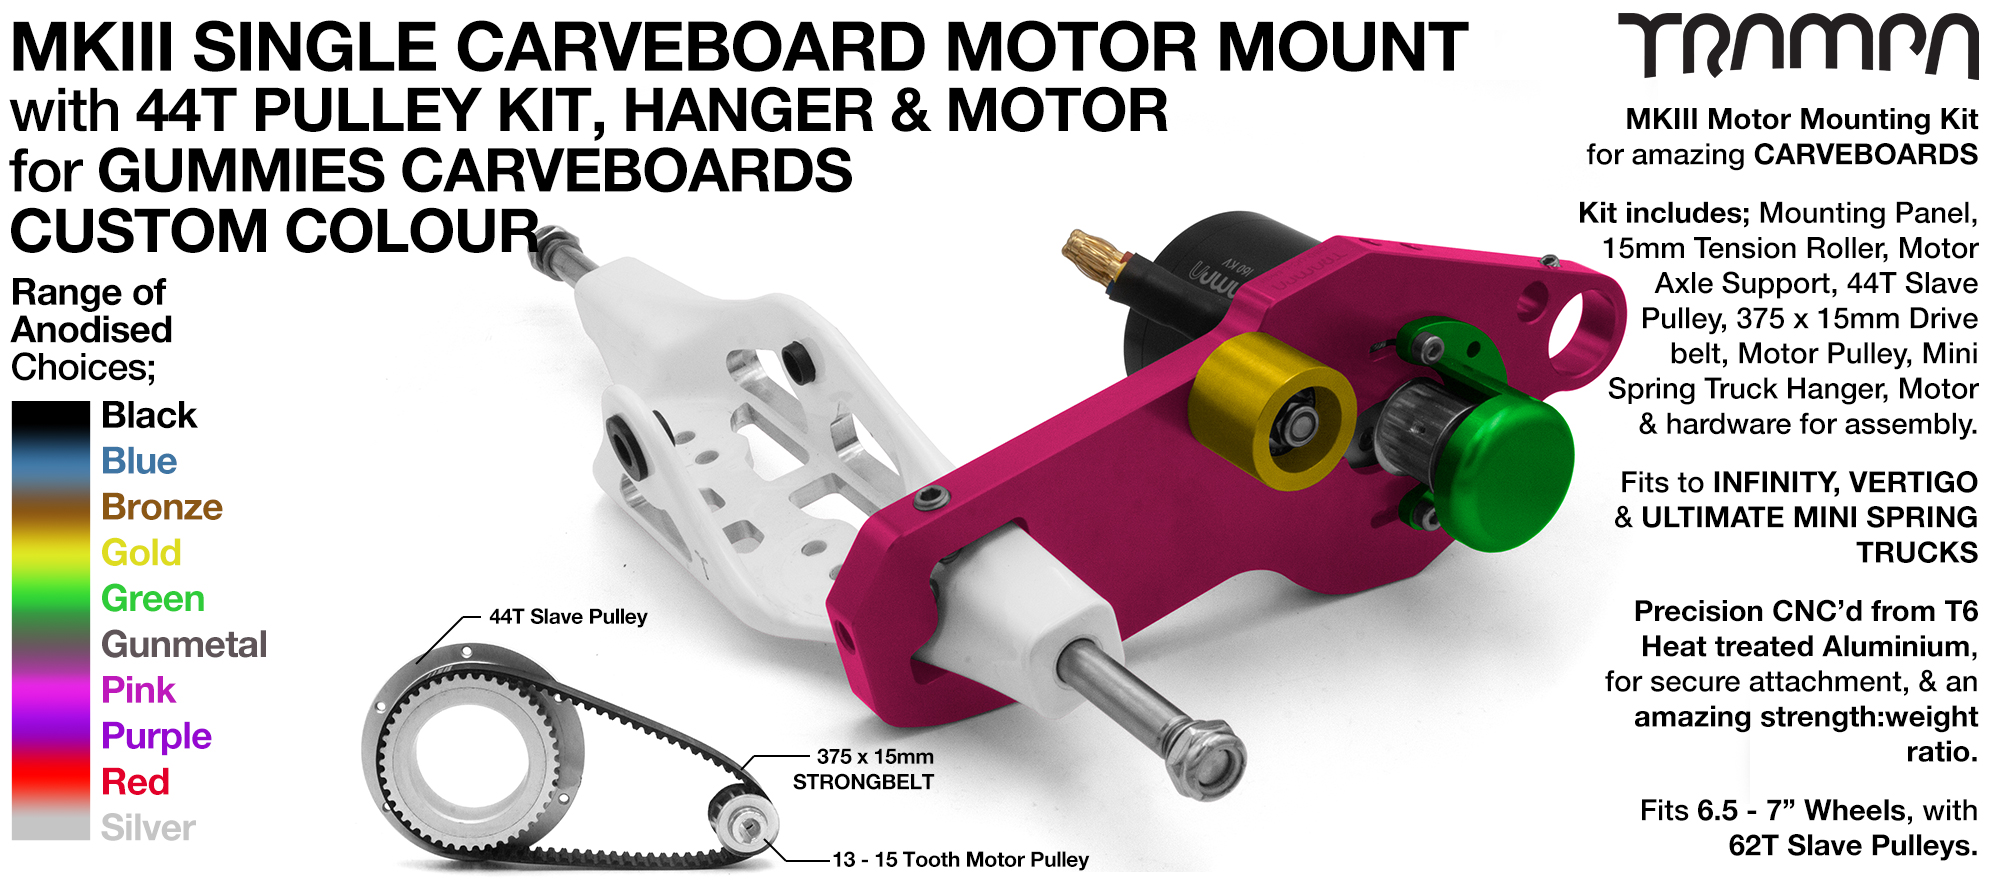 MkIII GUMMIES CARVEBOARD Motormount on a Mini HANGER with 44 Tooth Pulley Kit & Motor - SINGLE